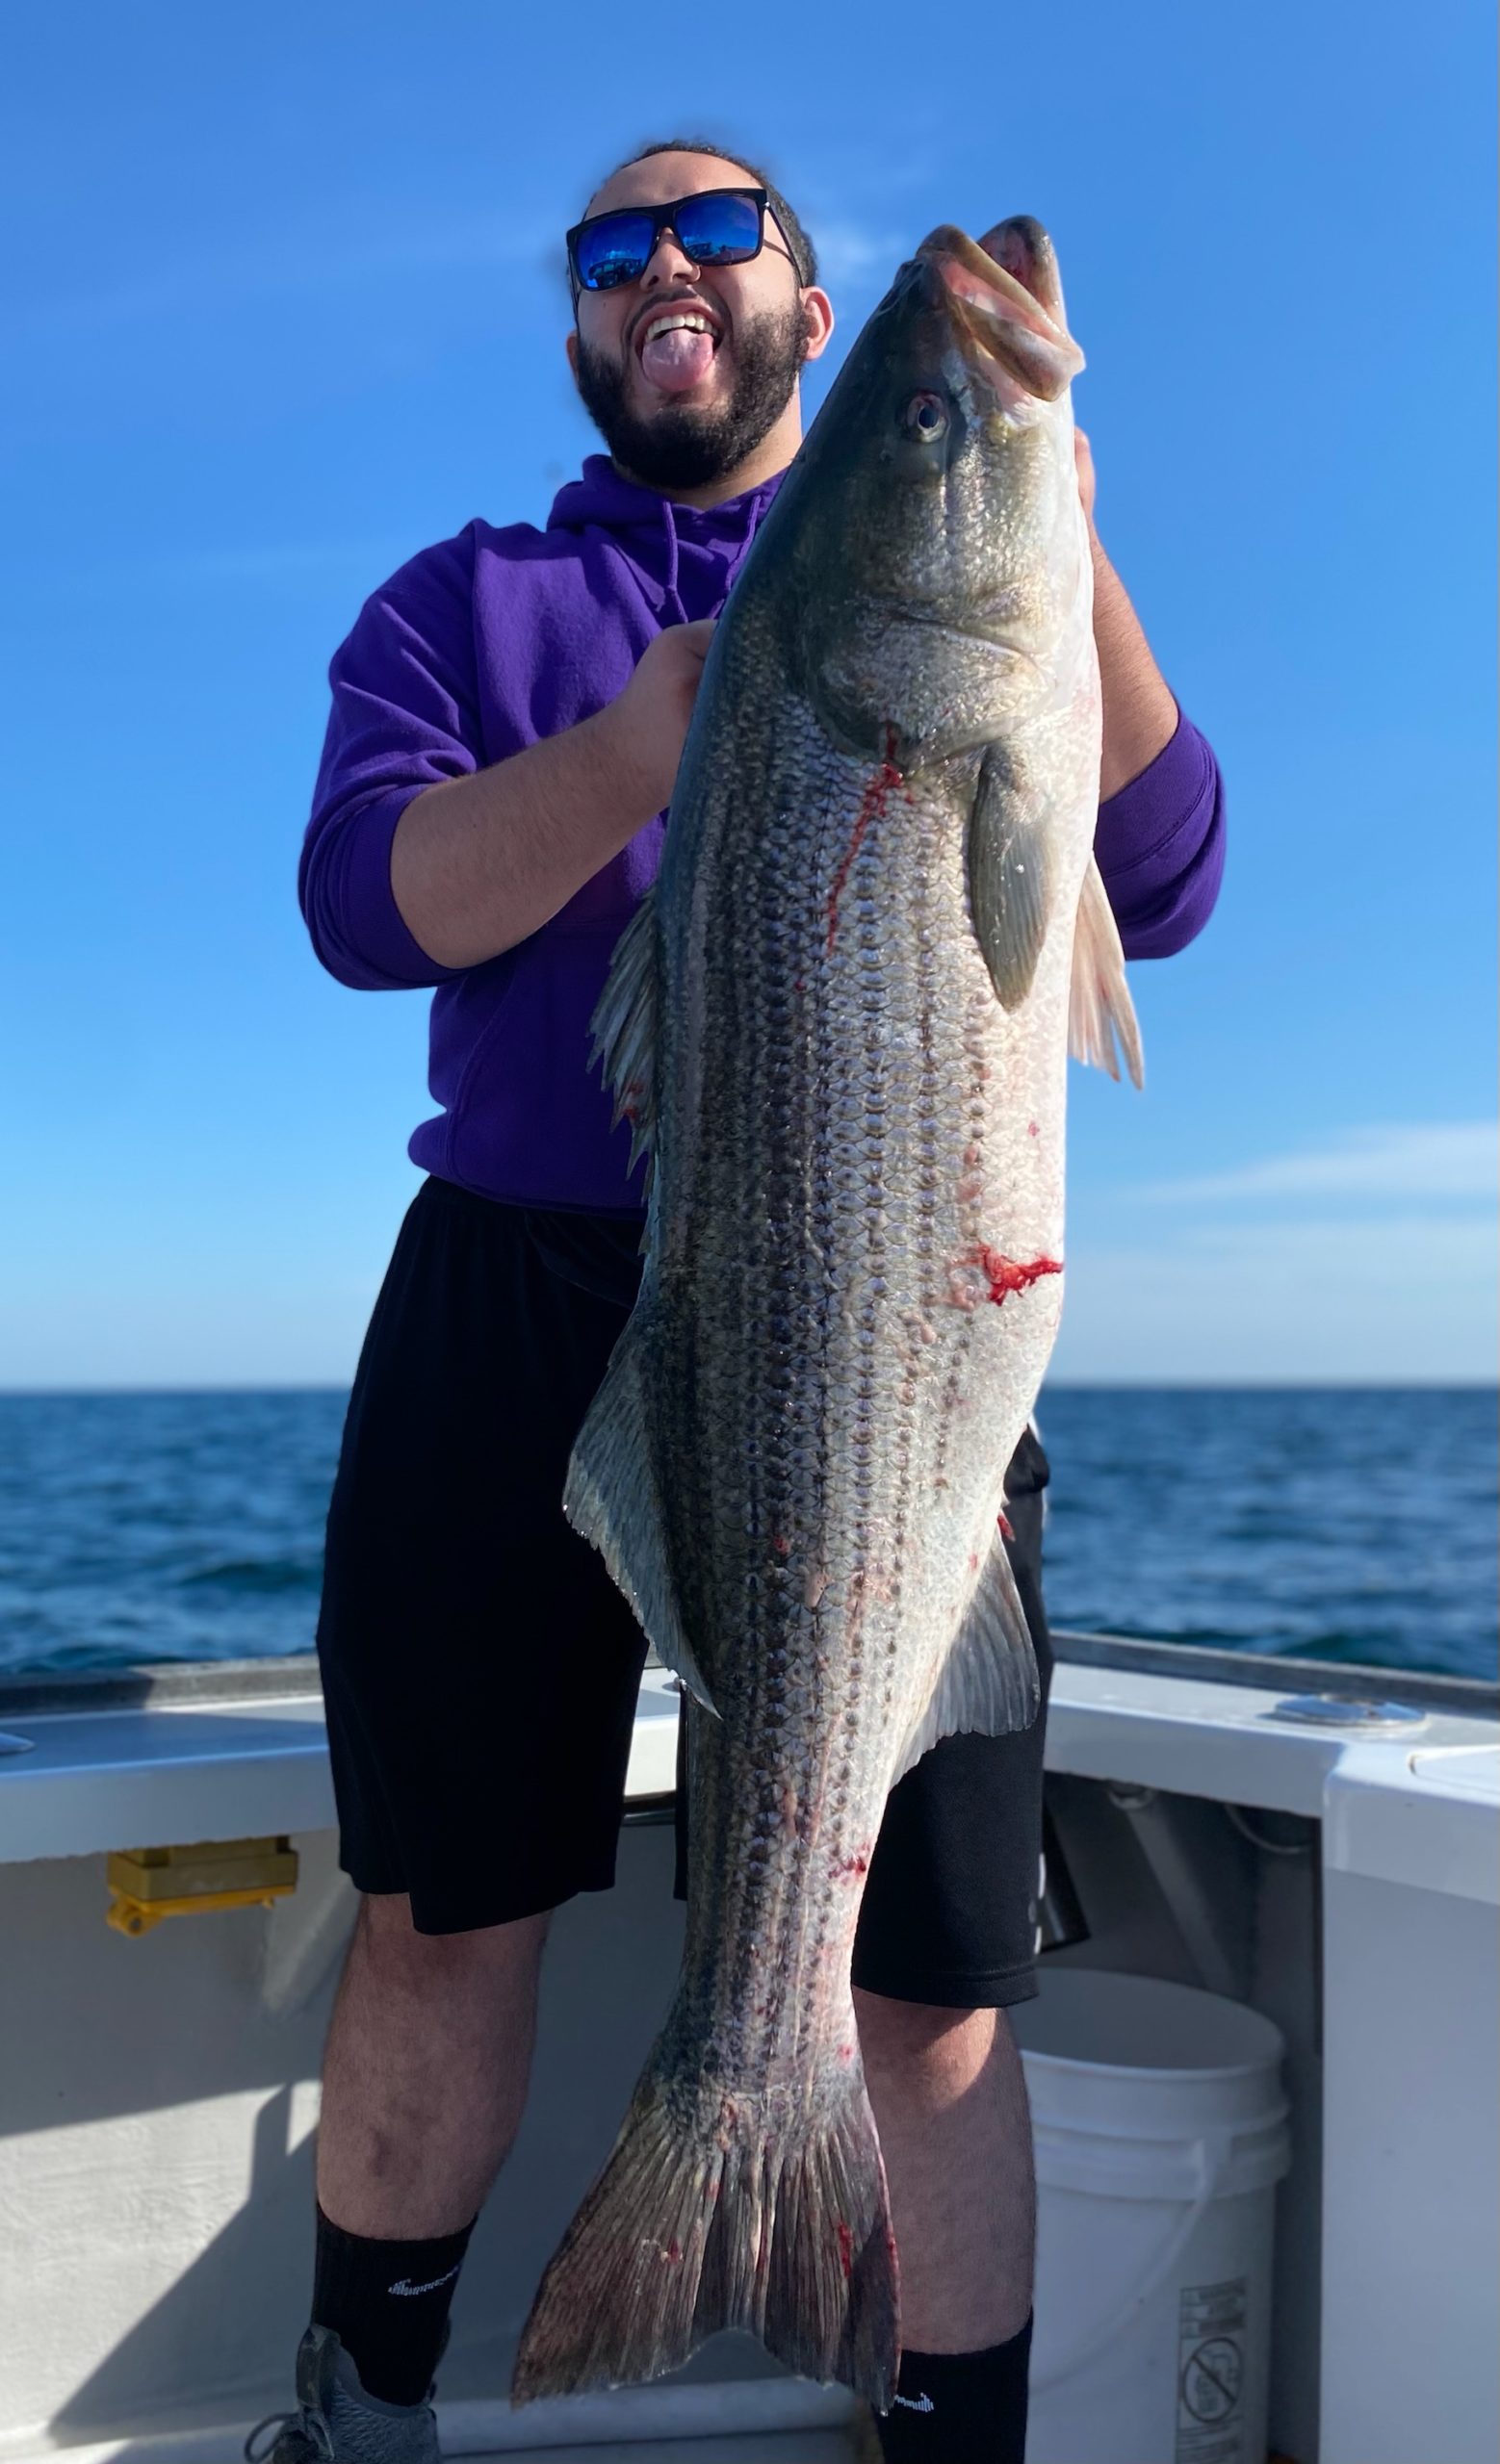 Cape Cod Canal Fishing Report Outlet Styles, Save 58 jlcatj.gob.mx